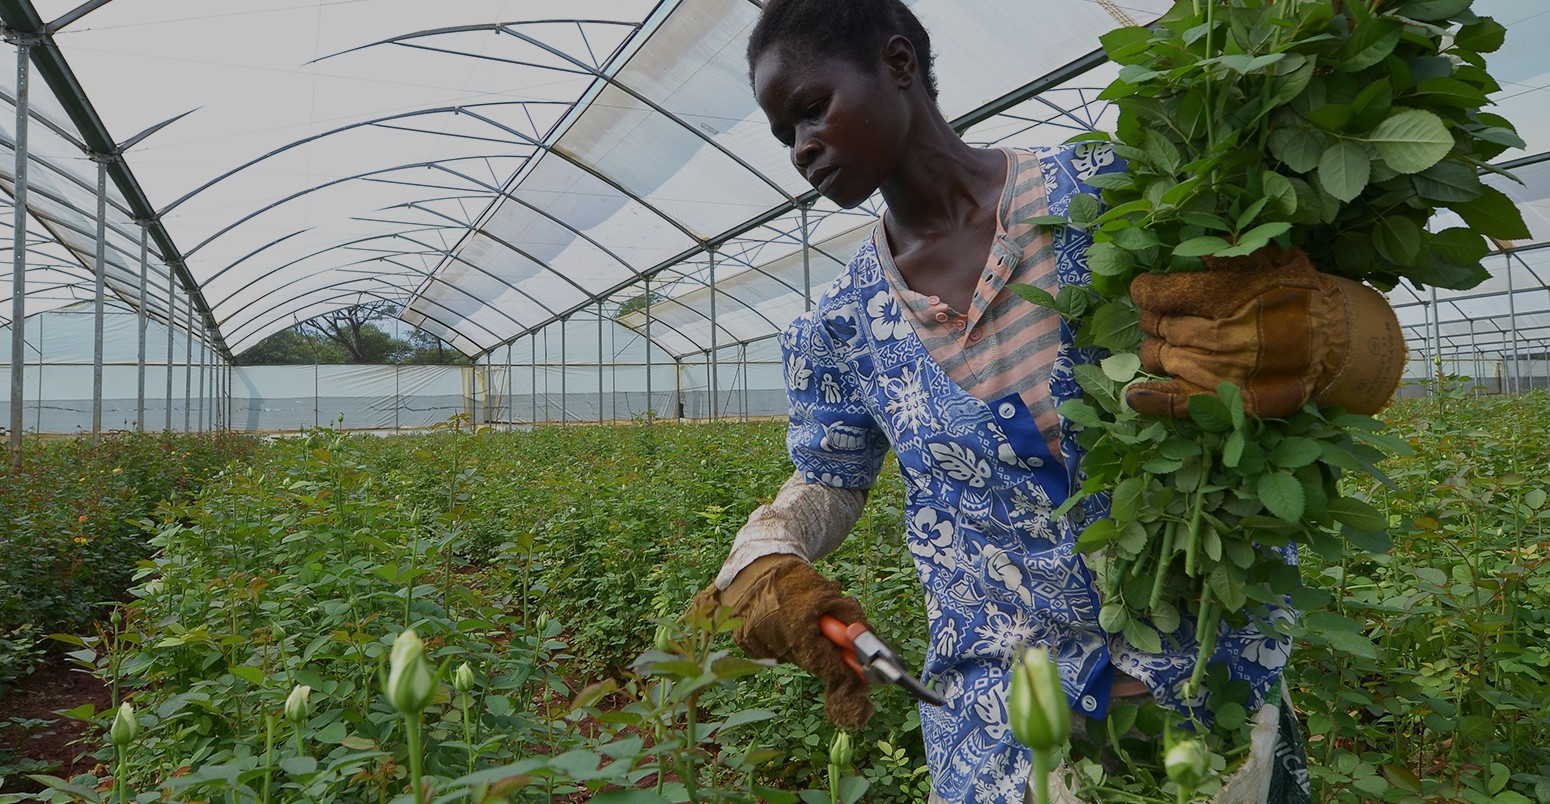 African women in the greenhouses select roses for export to Europe, which provide employment to 800 farmers, in Lusaka Zambia